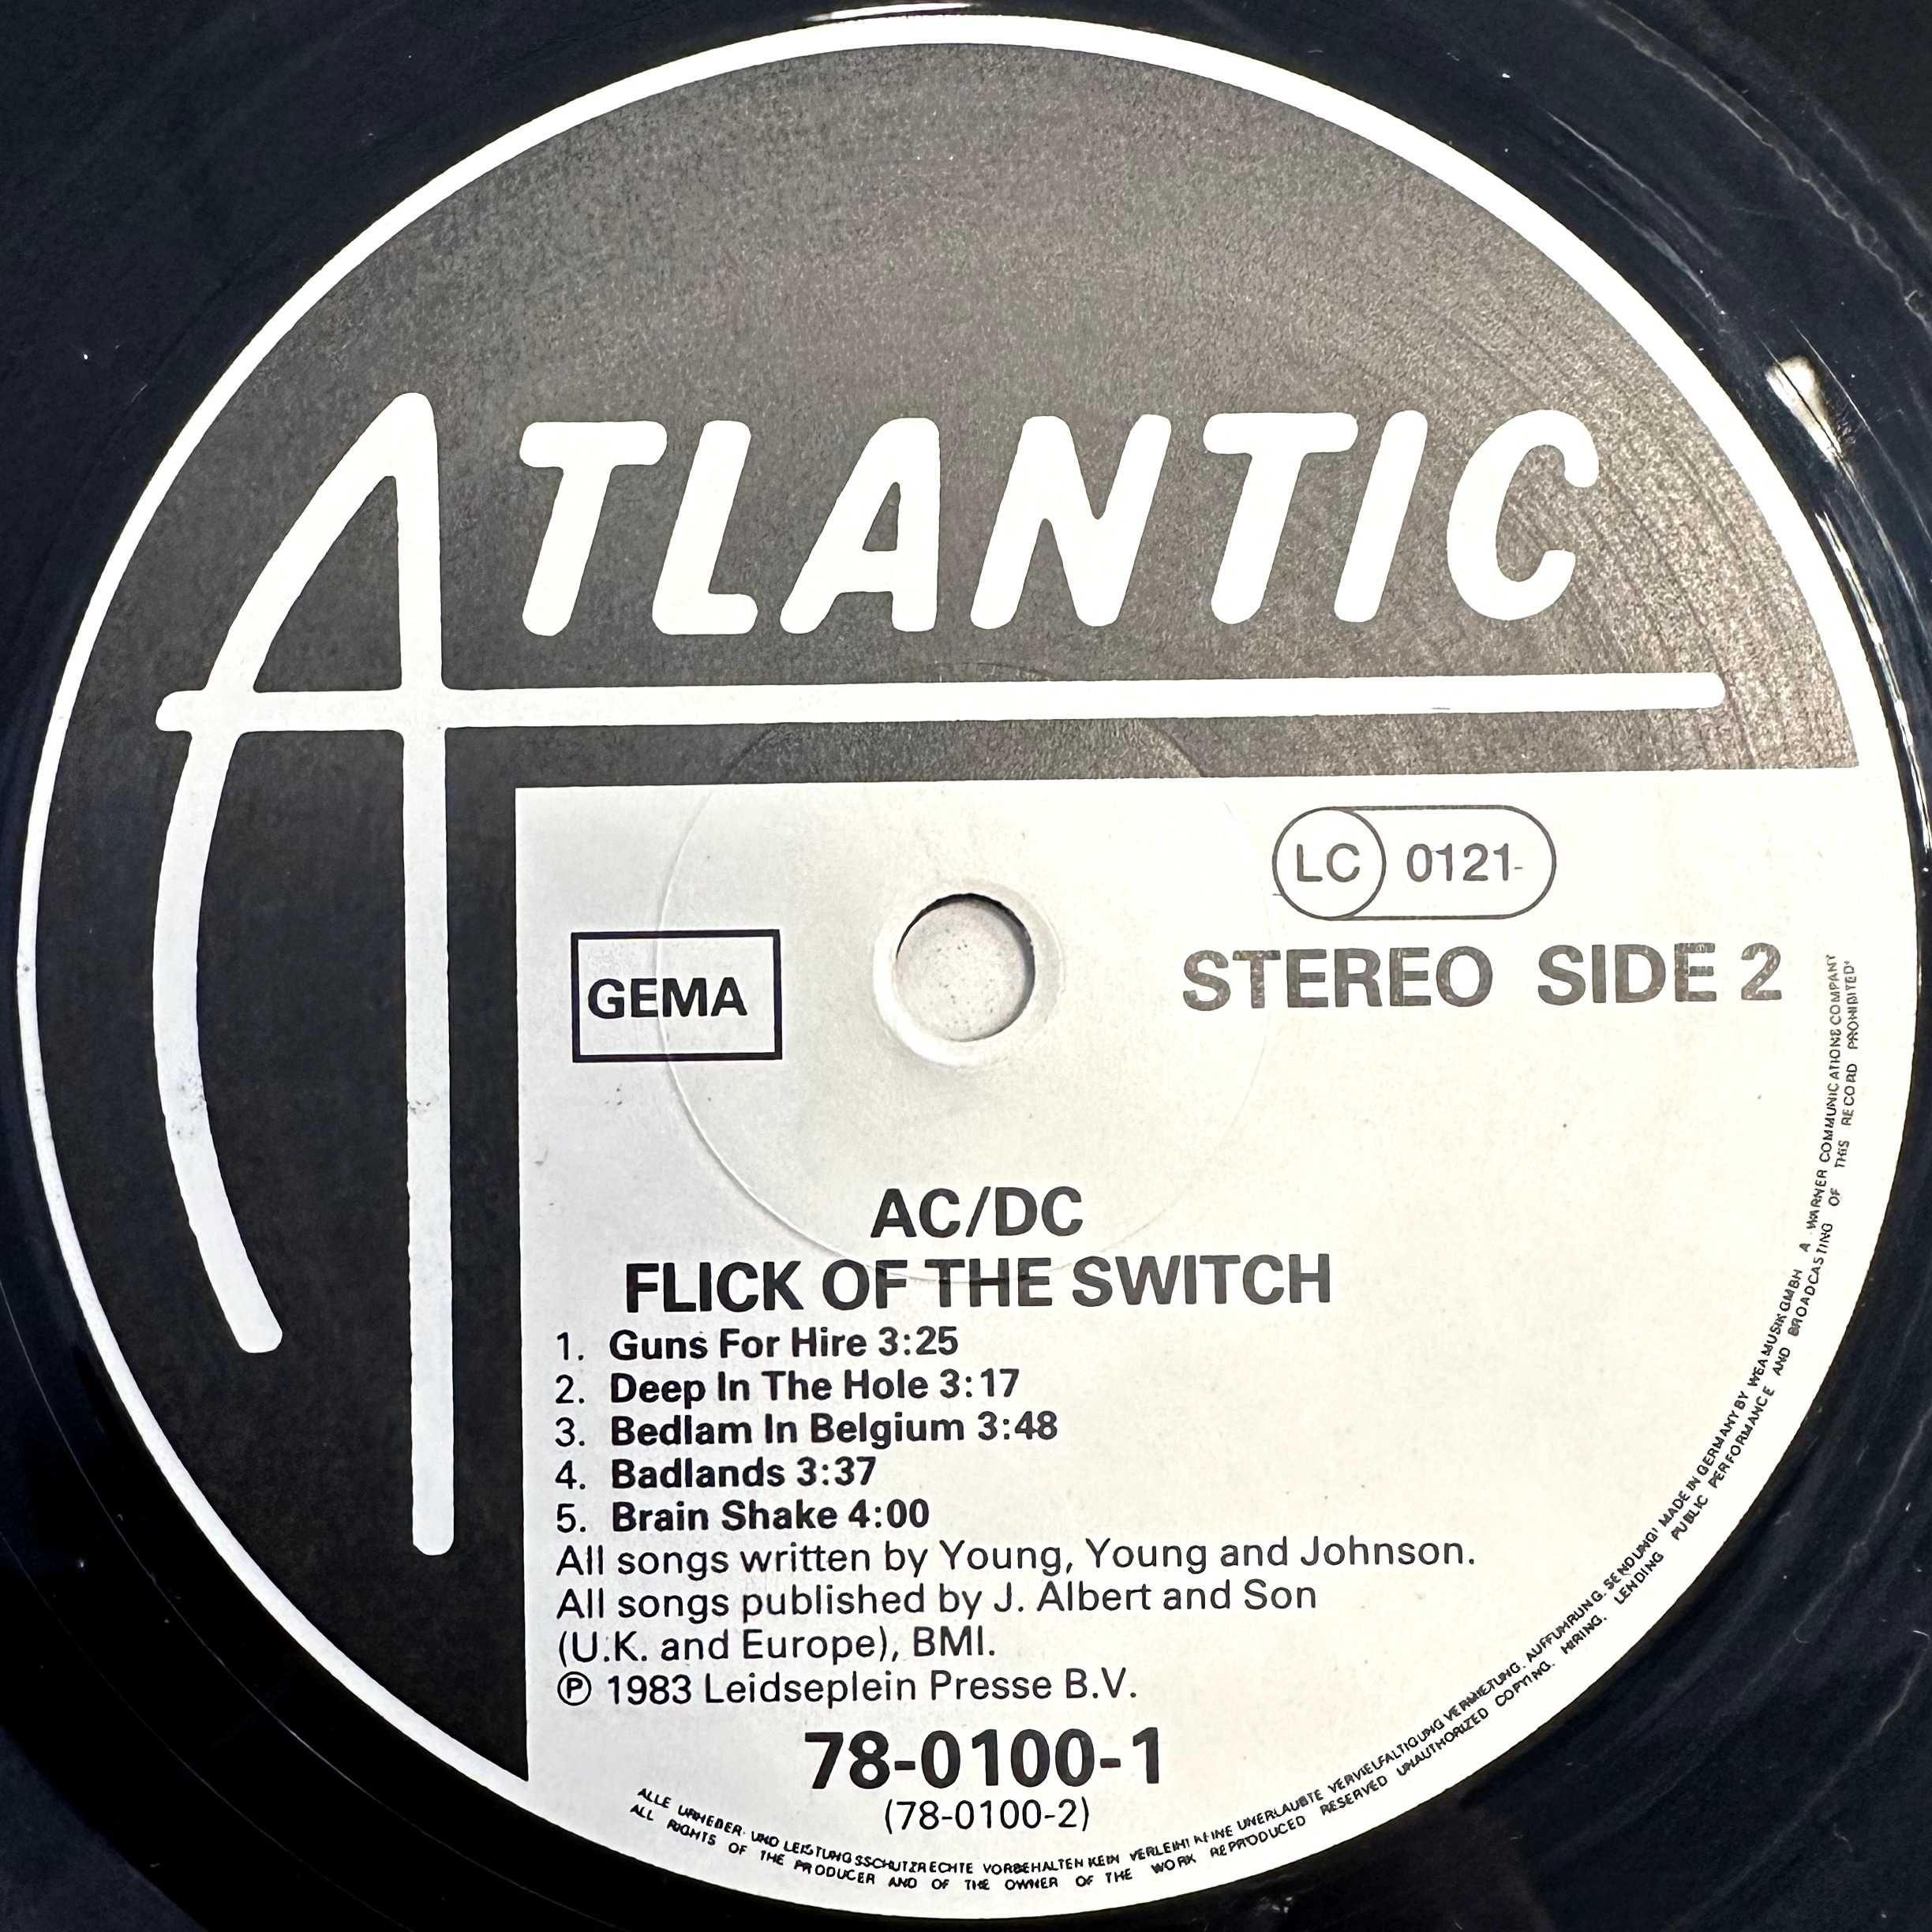 AC/DC - Flick of the Switch (Vinyl, 1983, Germany)